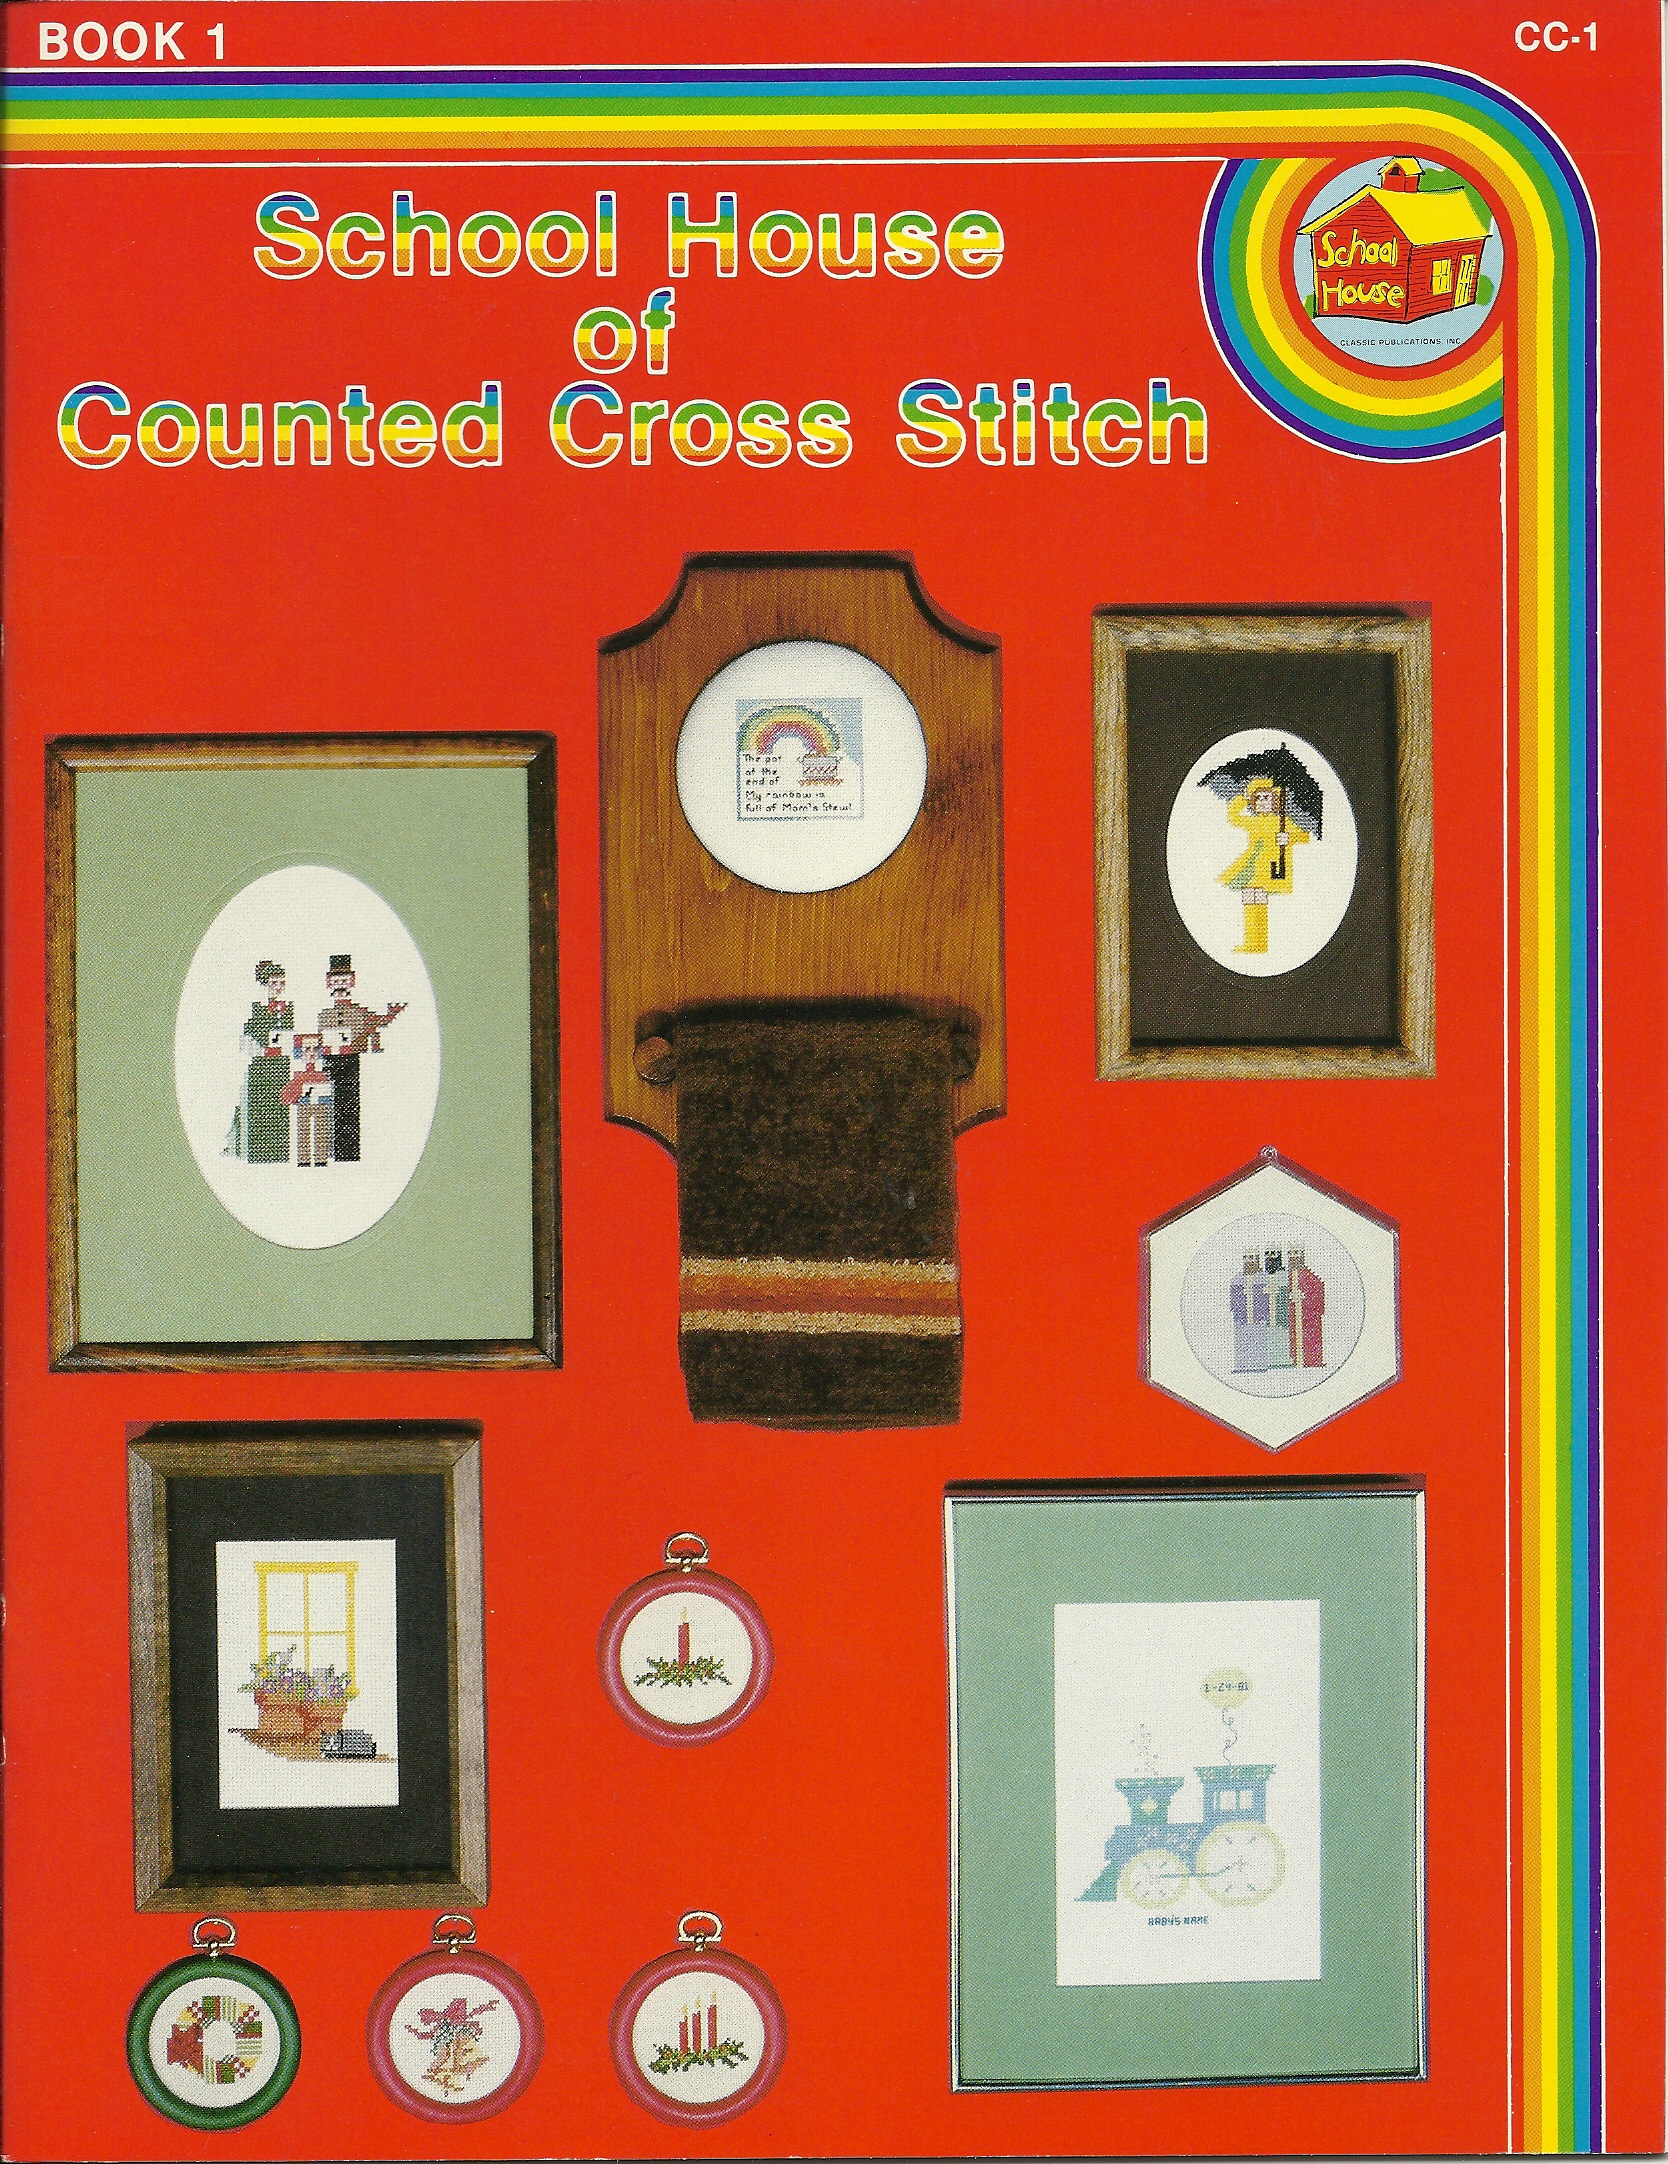 School House of Counted Cross Stitch  Book 1